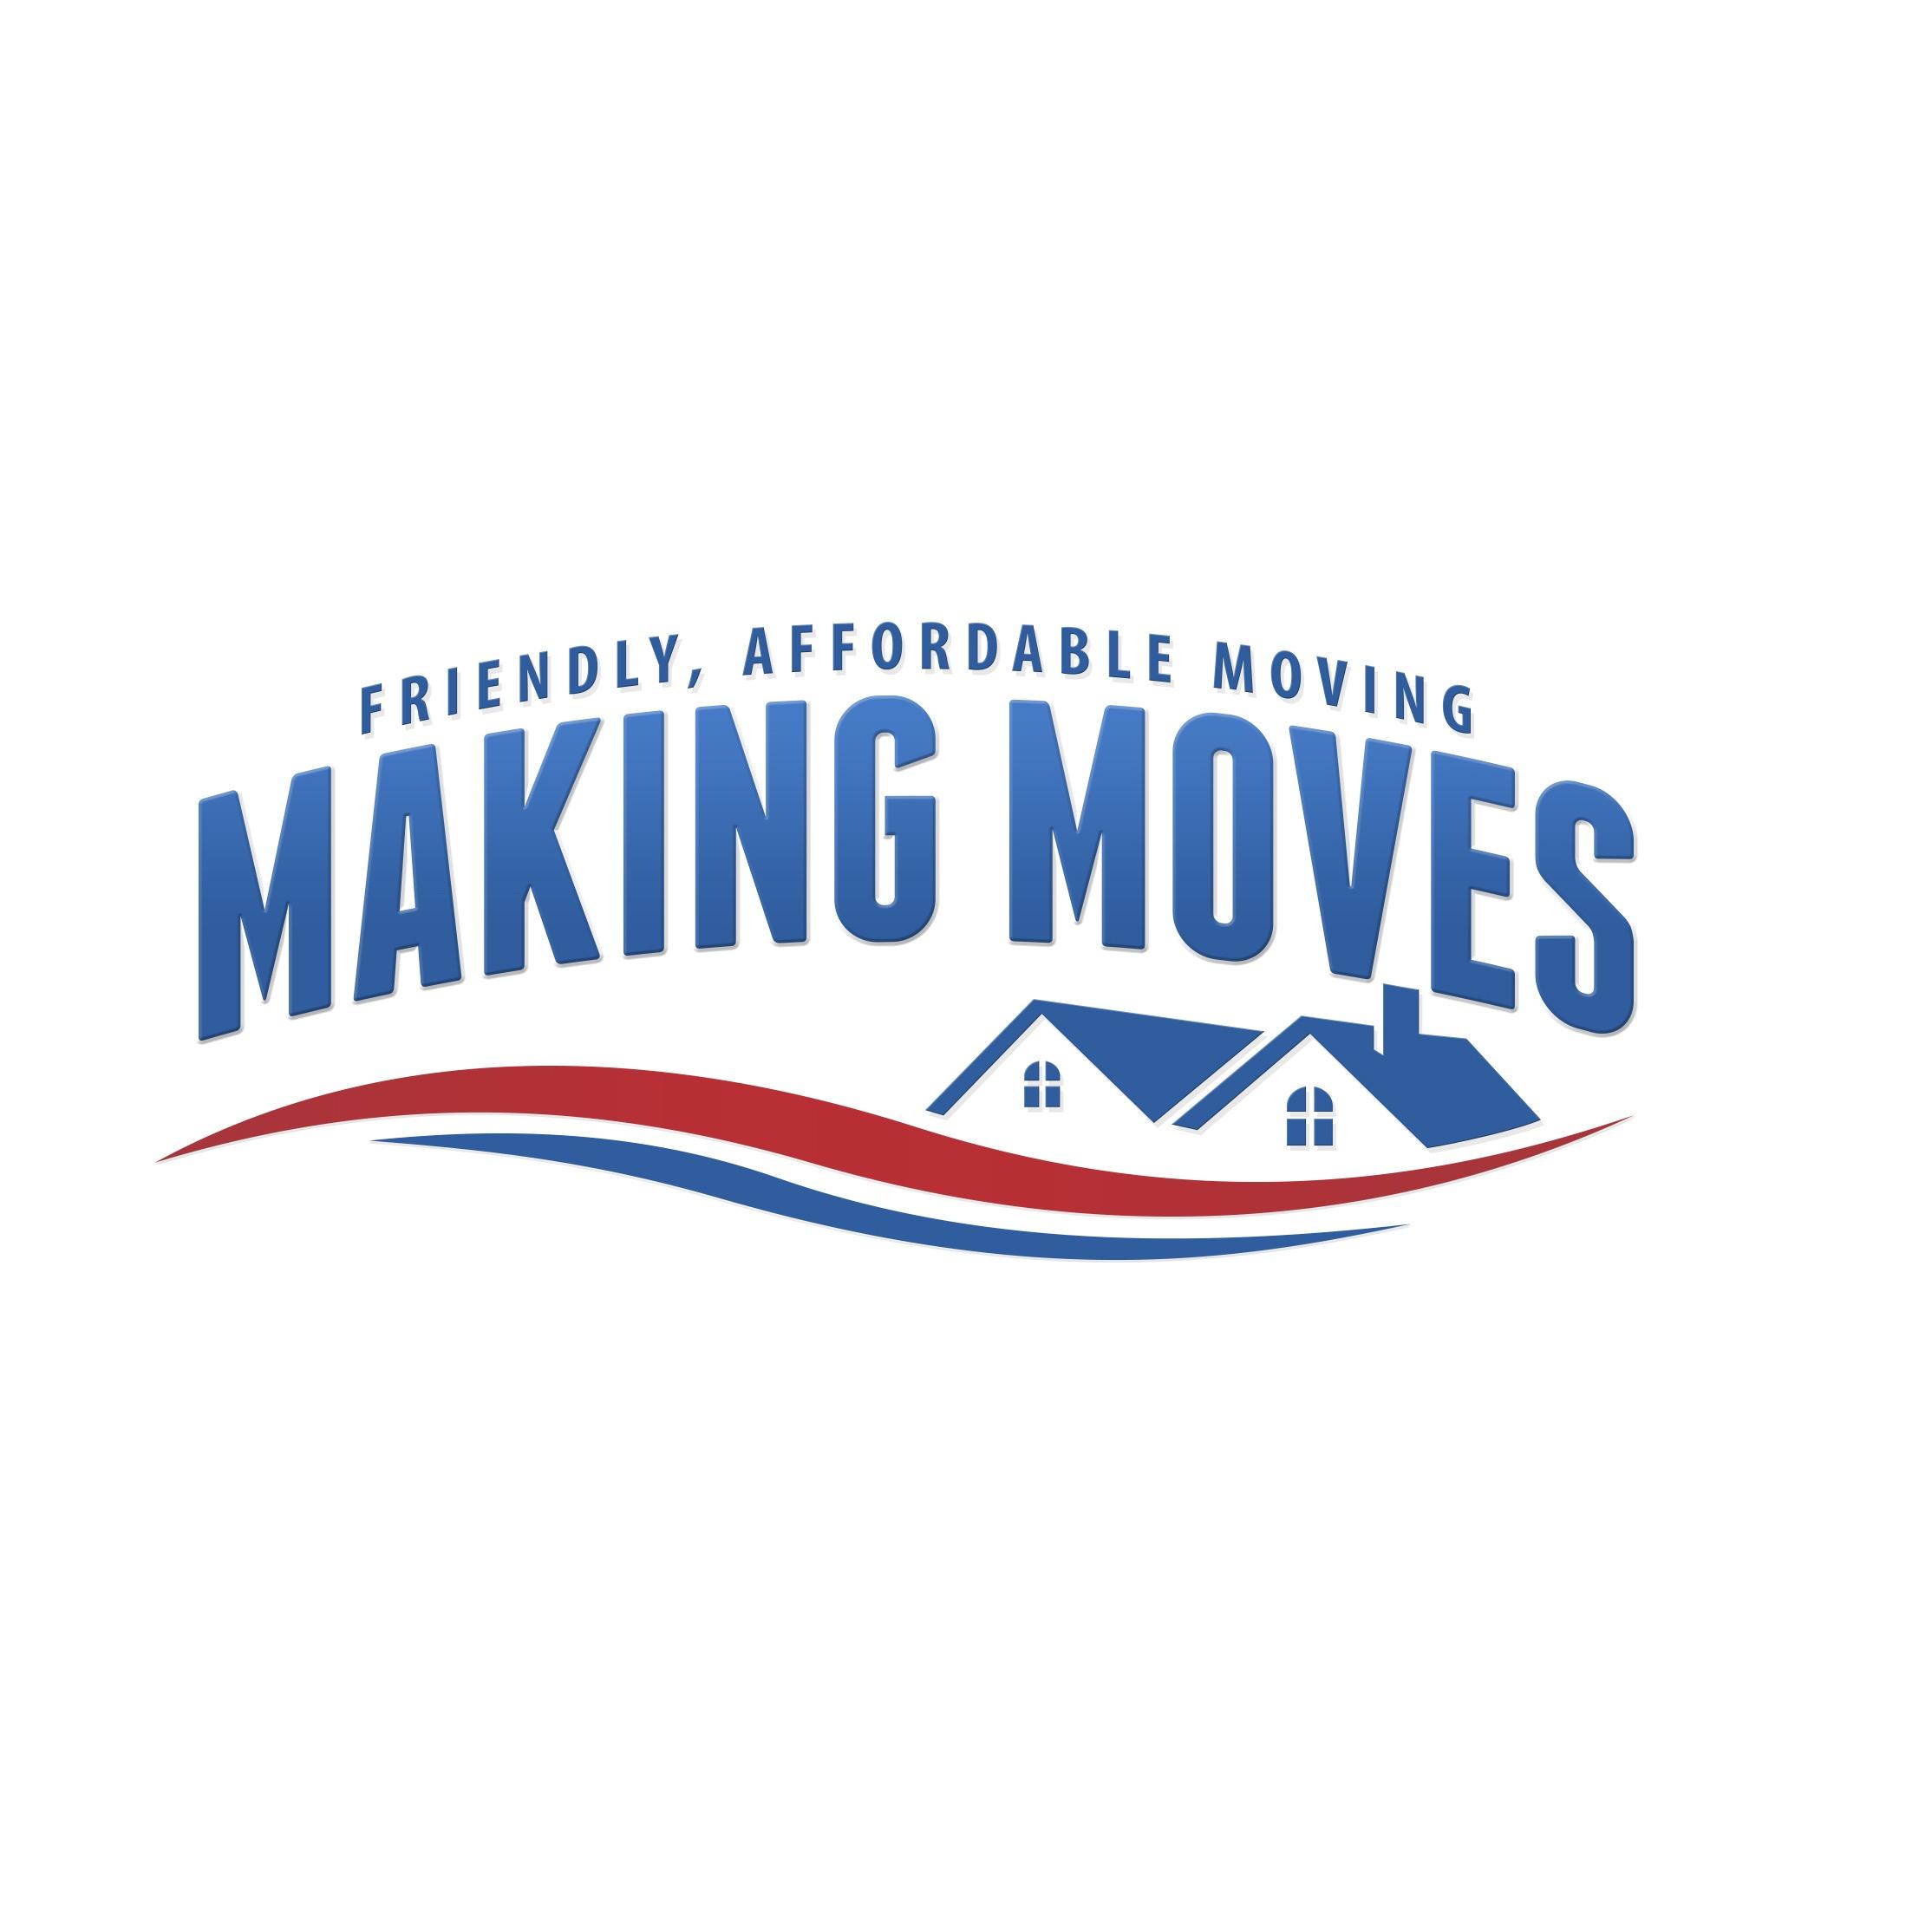 Making Moves - Cleveland, TN 37312 - (423)451-8676 | ShowMeLocal.com